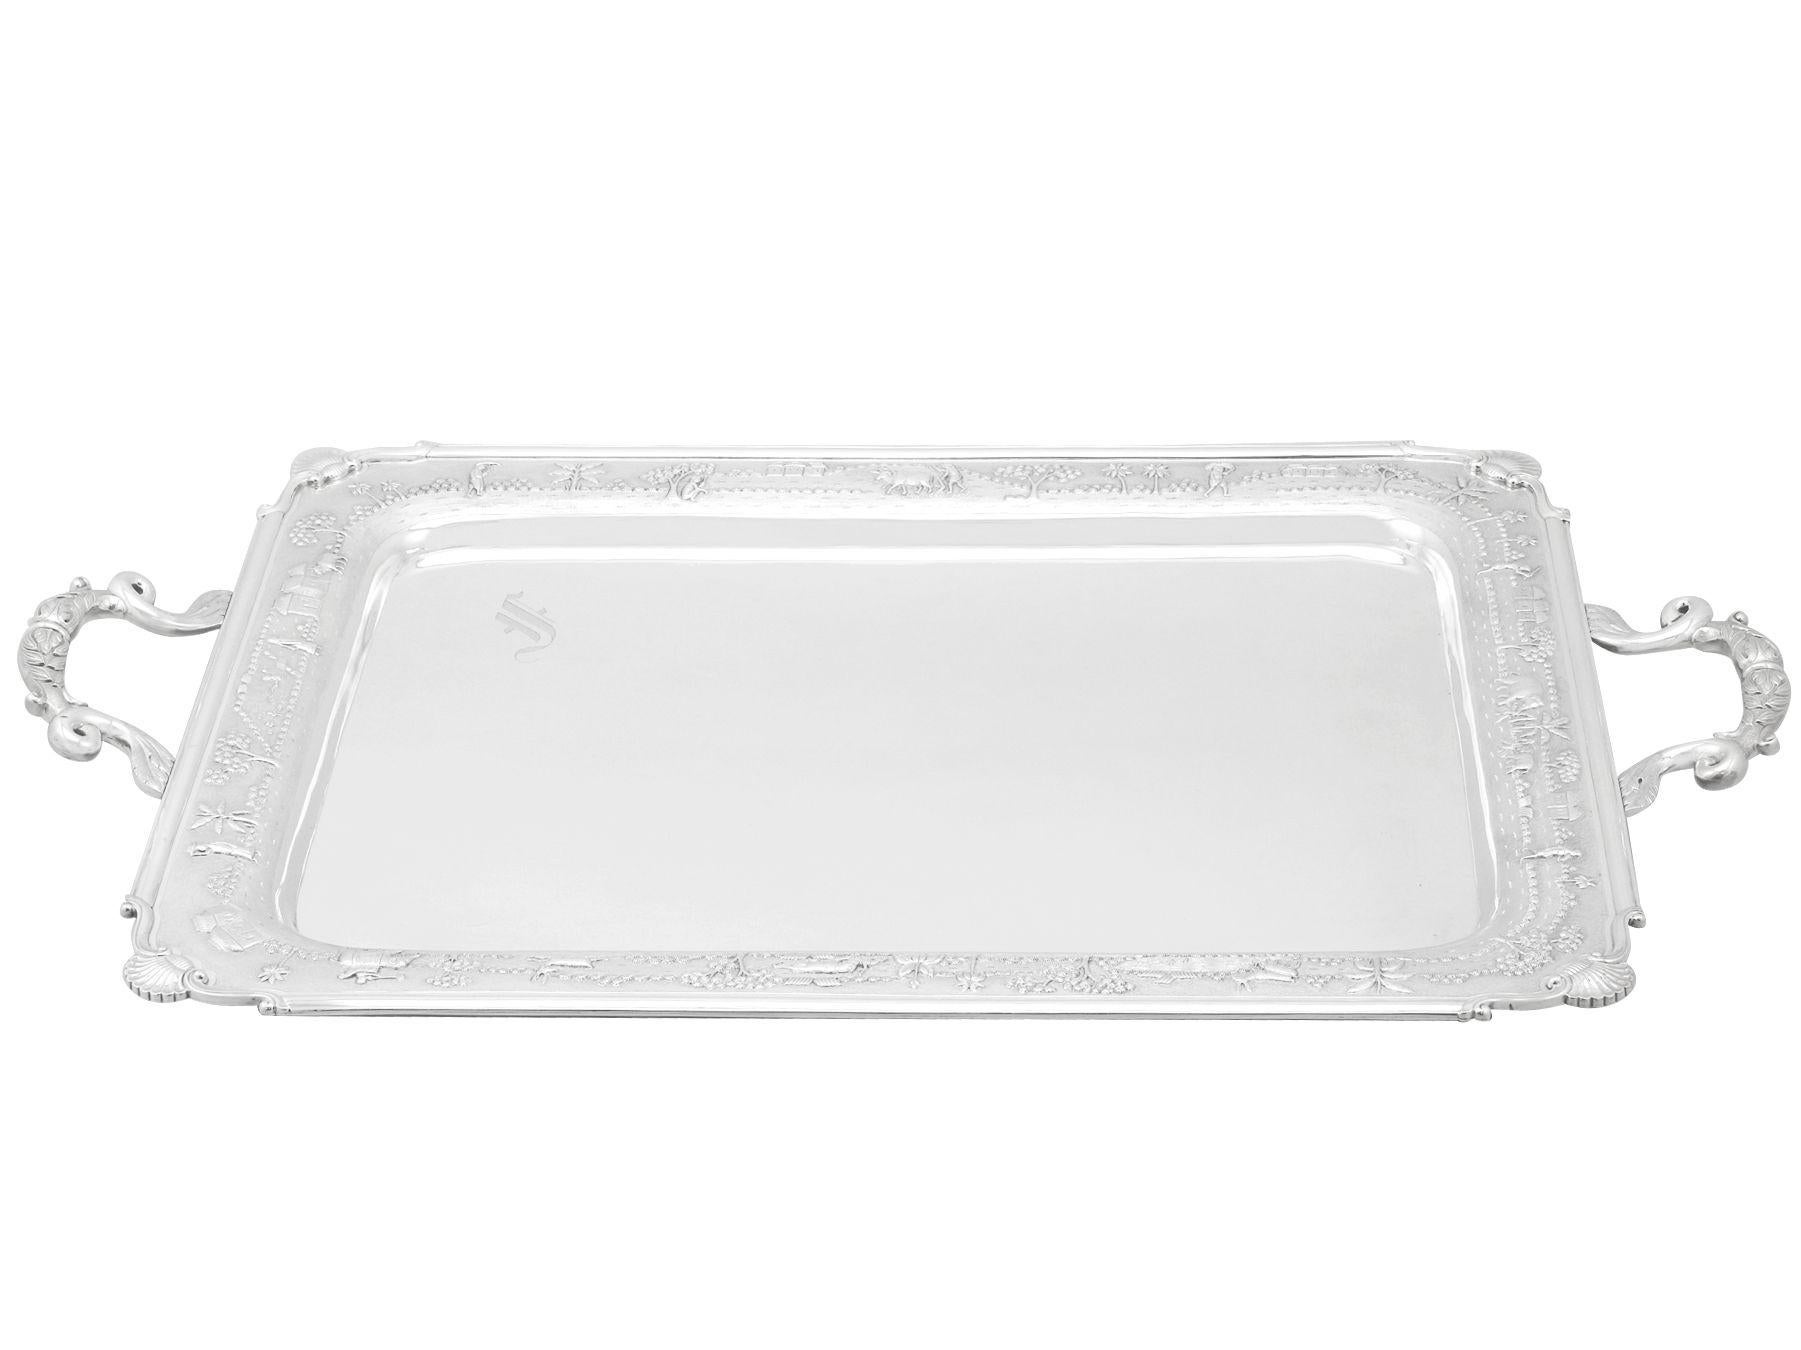 An exceptional, rare and impressive antique Indian silver two handled tea tray, an addition to our Asian silverware collection.

This exceptional antique Indian silver tray has a rectangular shaped form with rounded corners.

This two handled tea